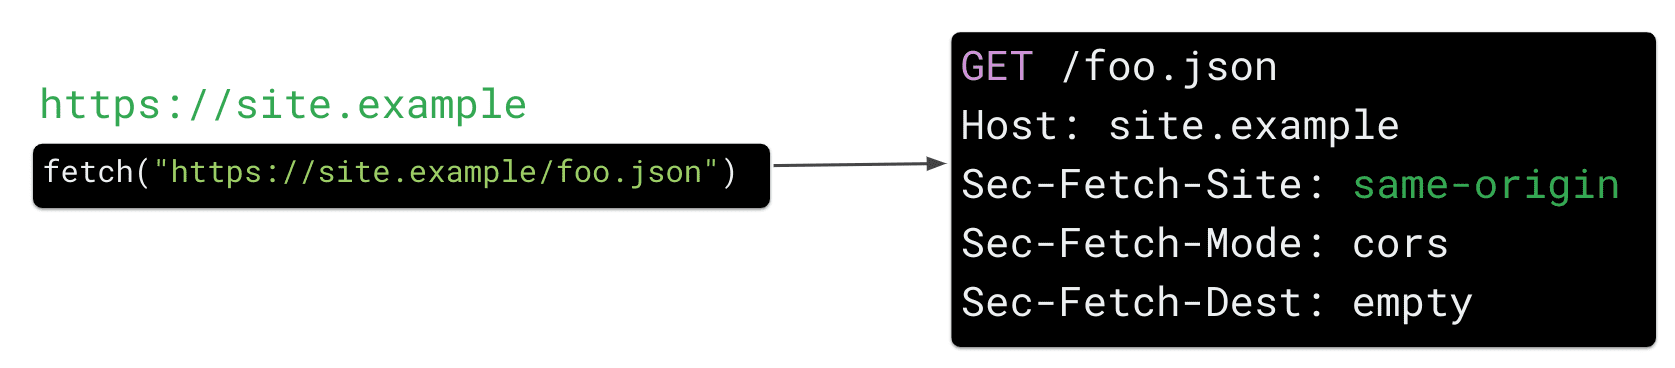 A fetch request from https://site.example for the resource https://site.example/foo.json in JavaScript causes the browser to send the HTTP request header 'Sec Fetch-Site: same-origin'.